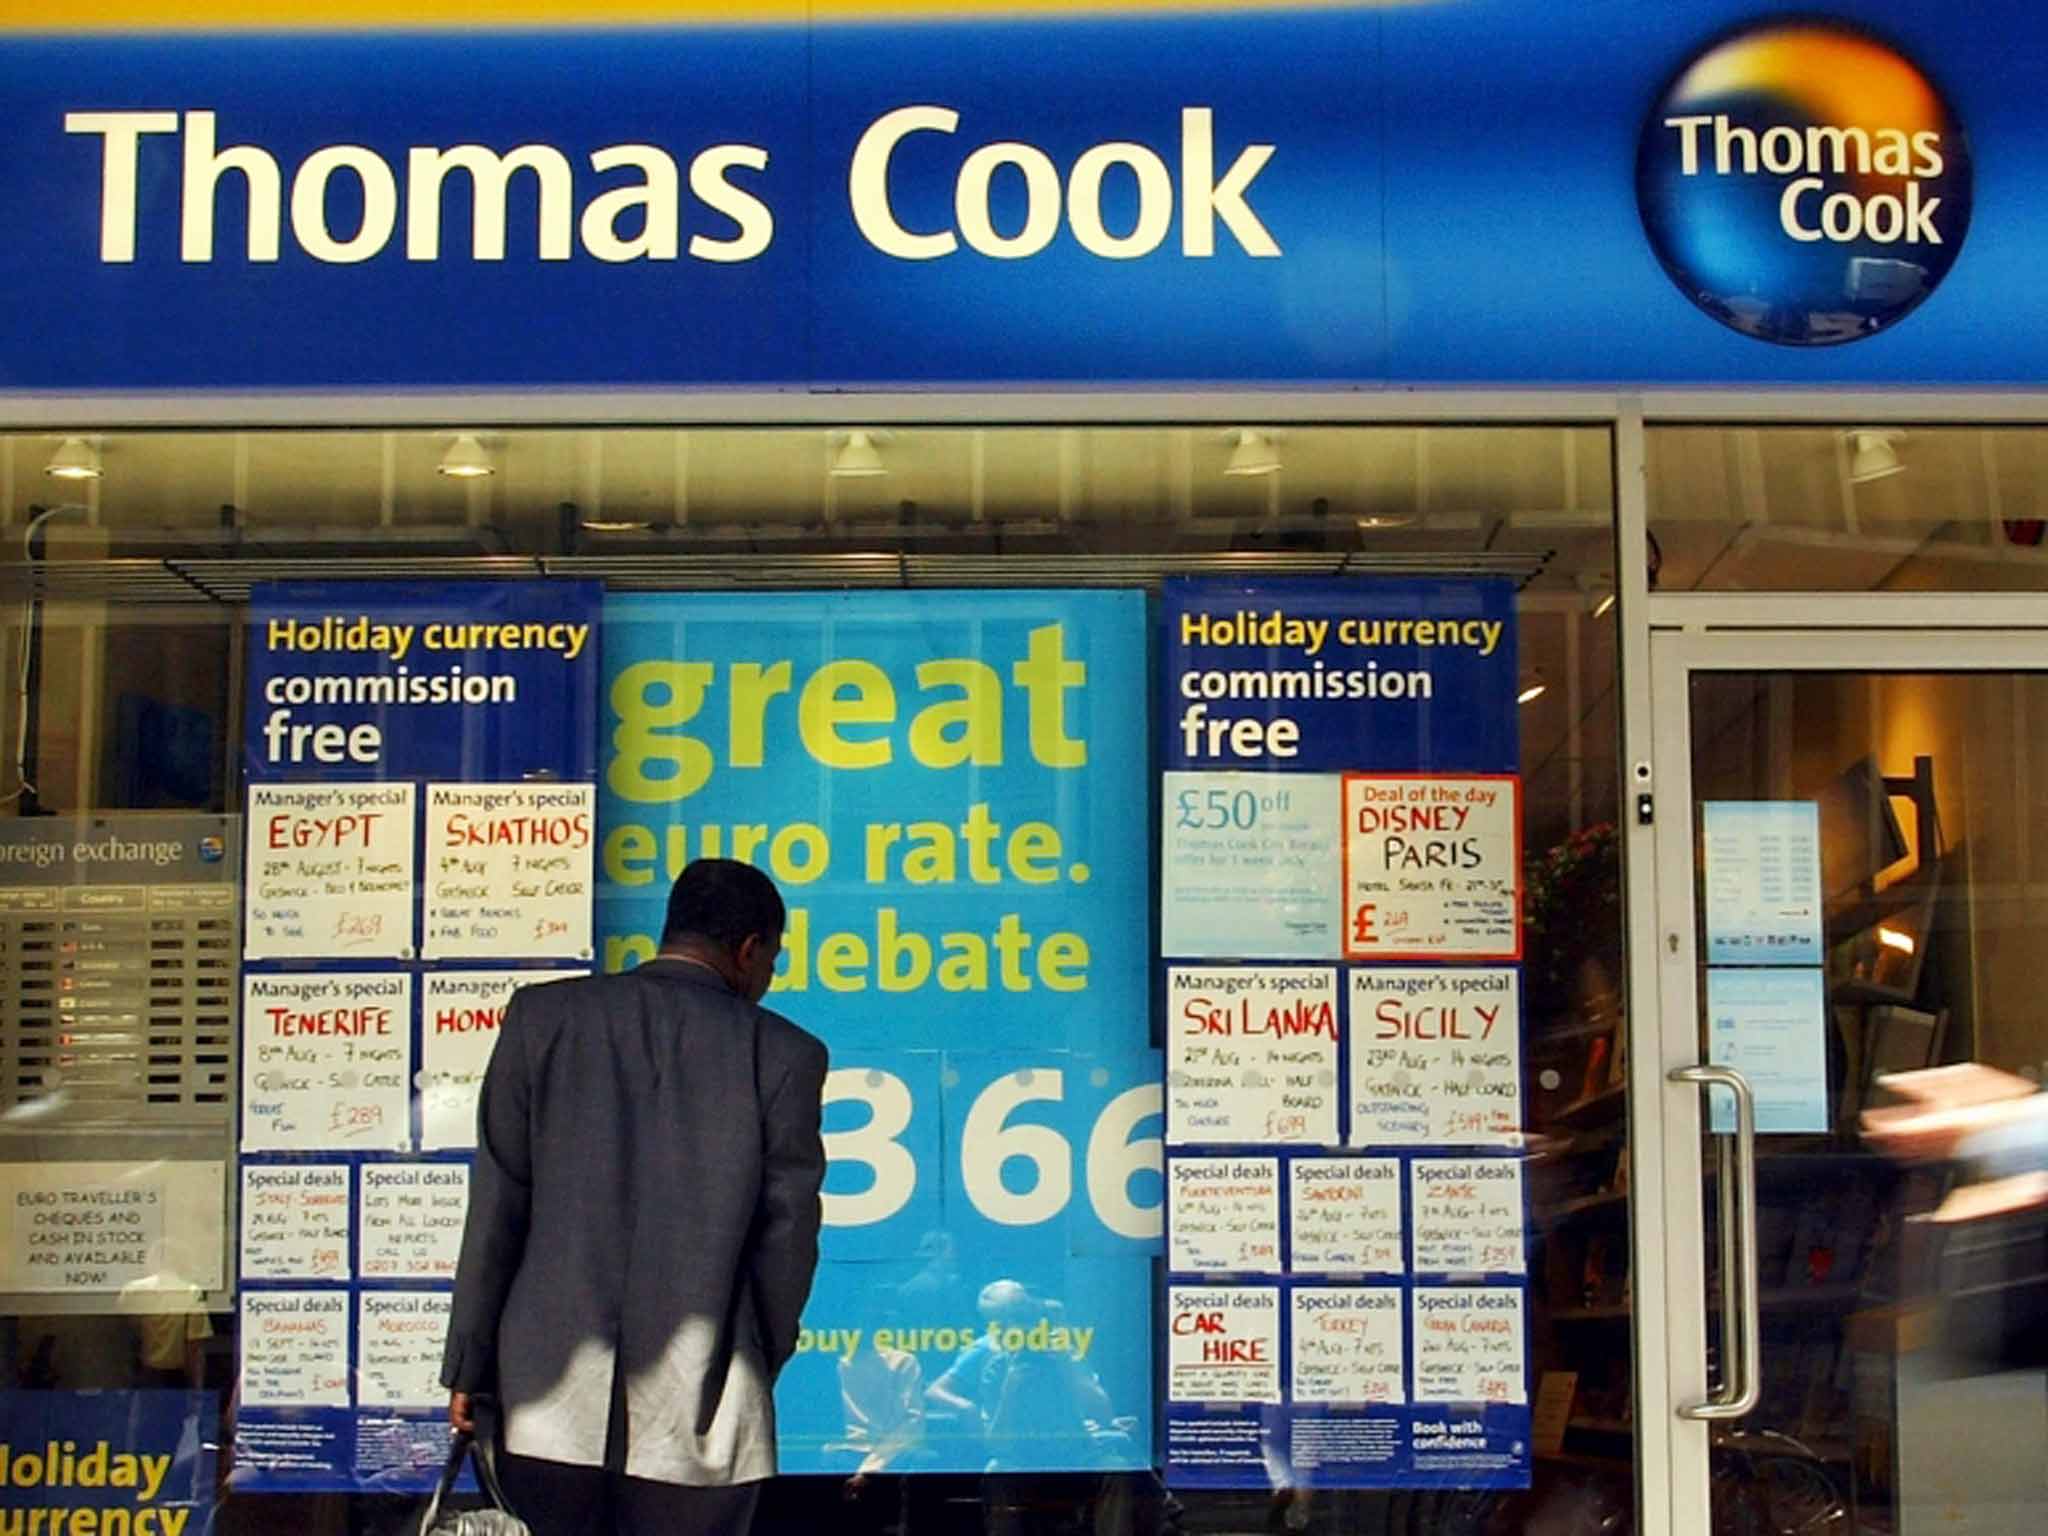 Time travel: Thomas Cook has been trading since 1841